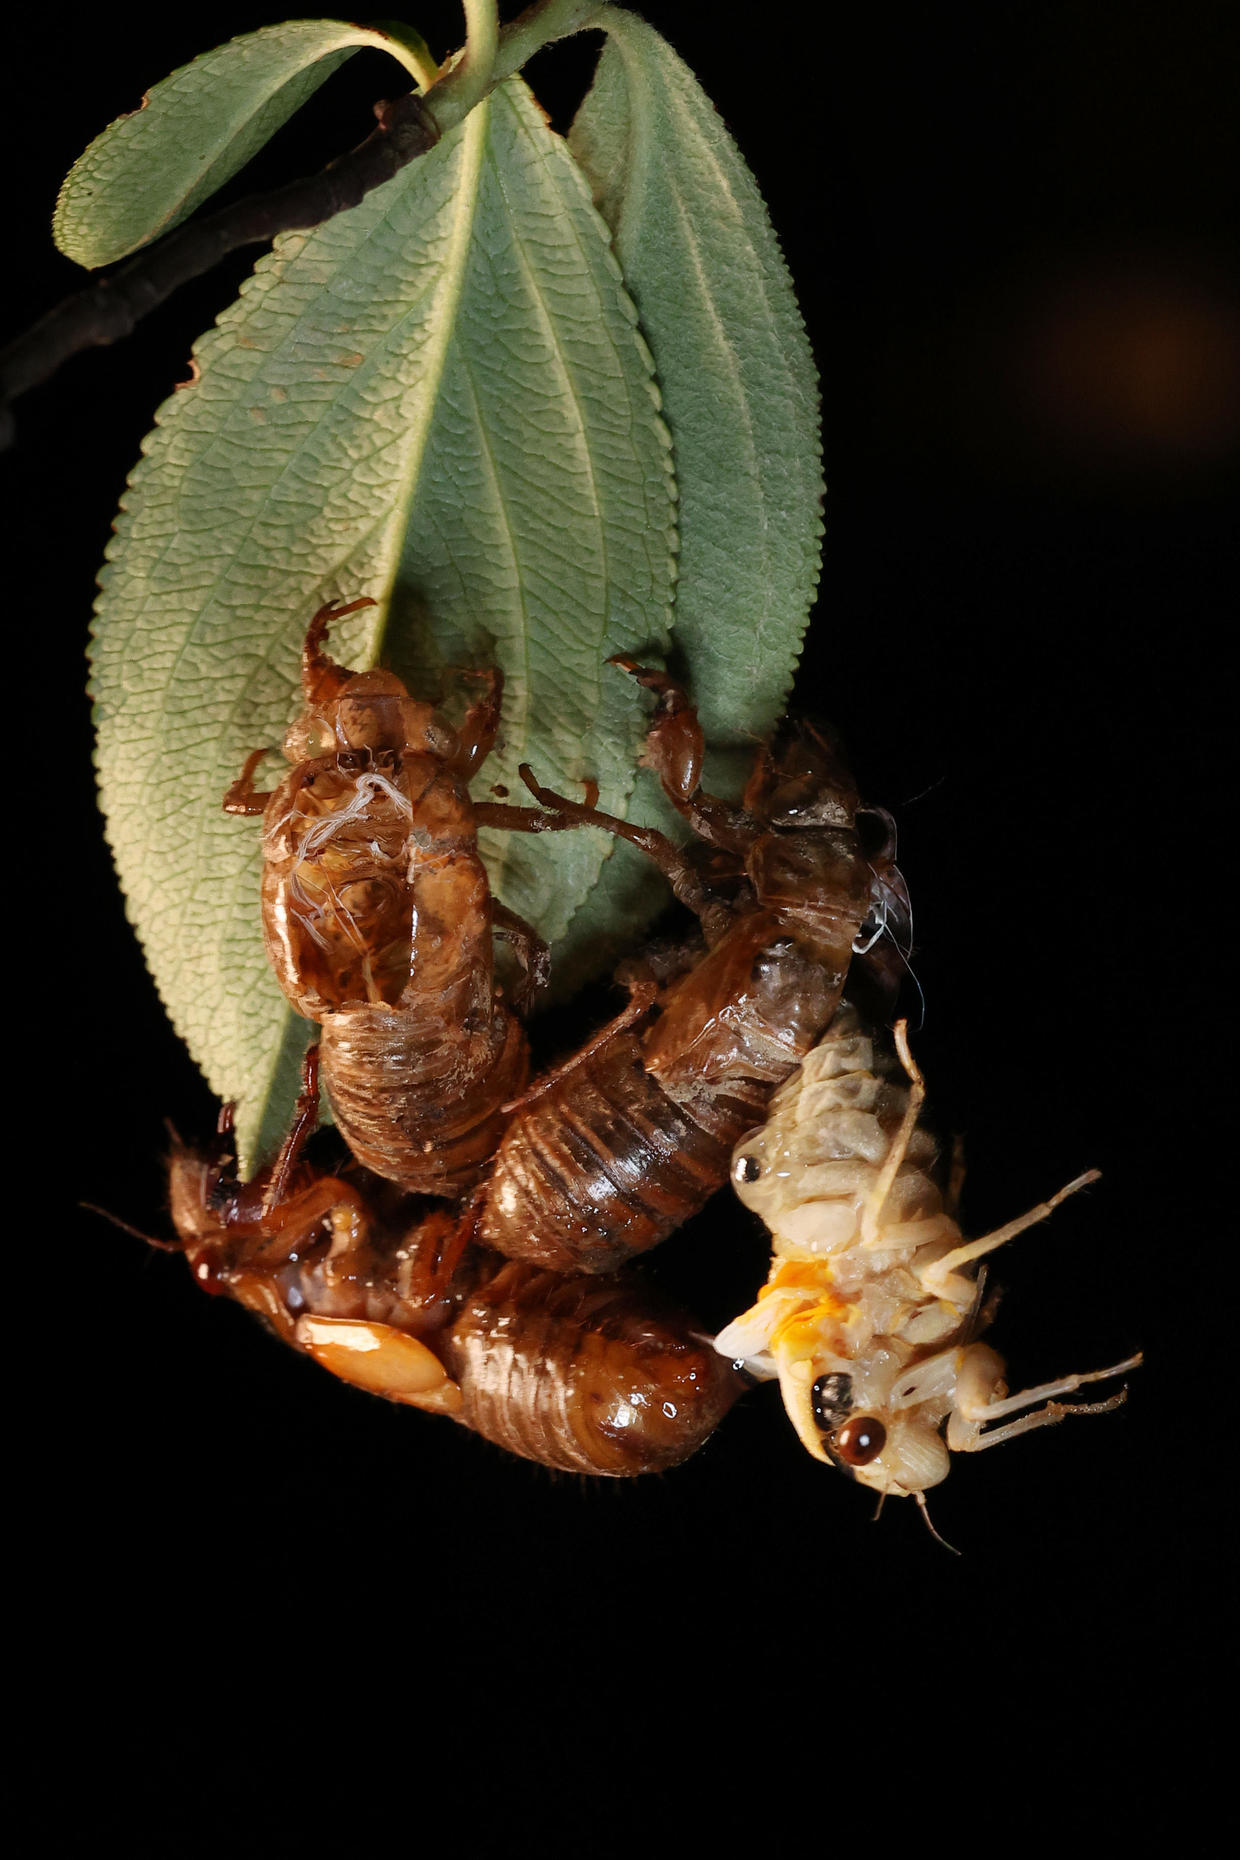 Brood X cicadas emerge after 17 years to swarm the Northeast (Warning